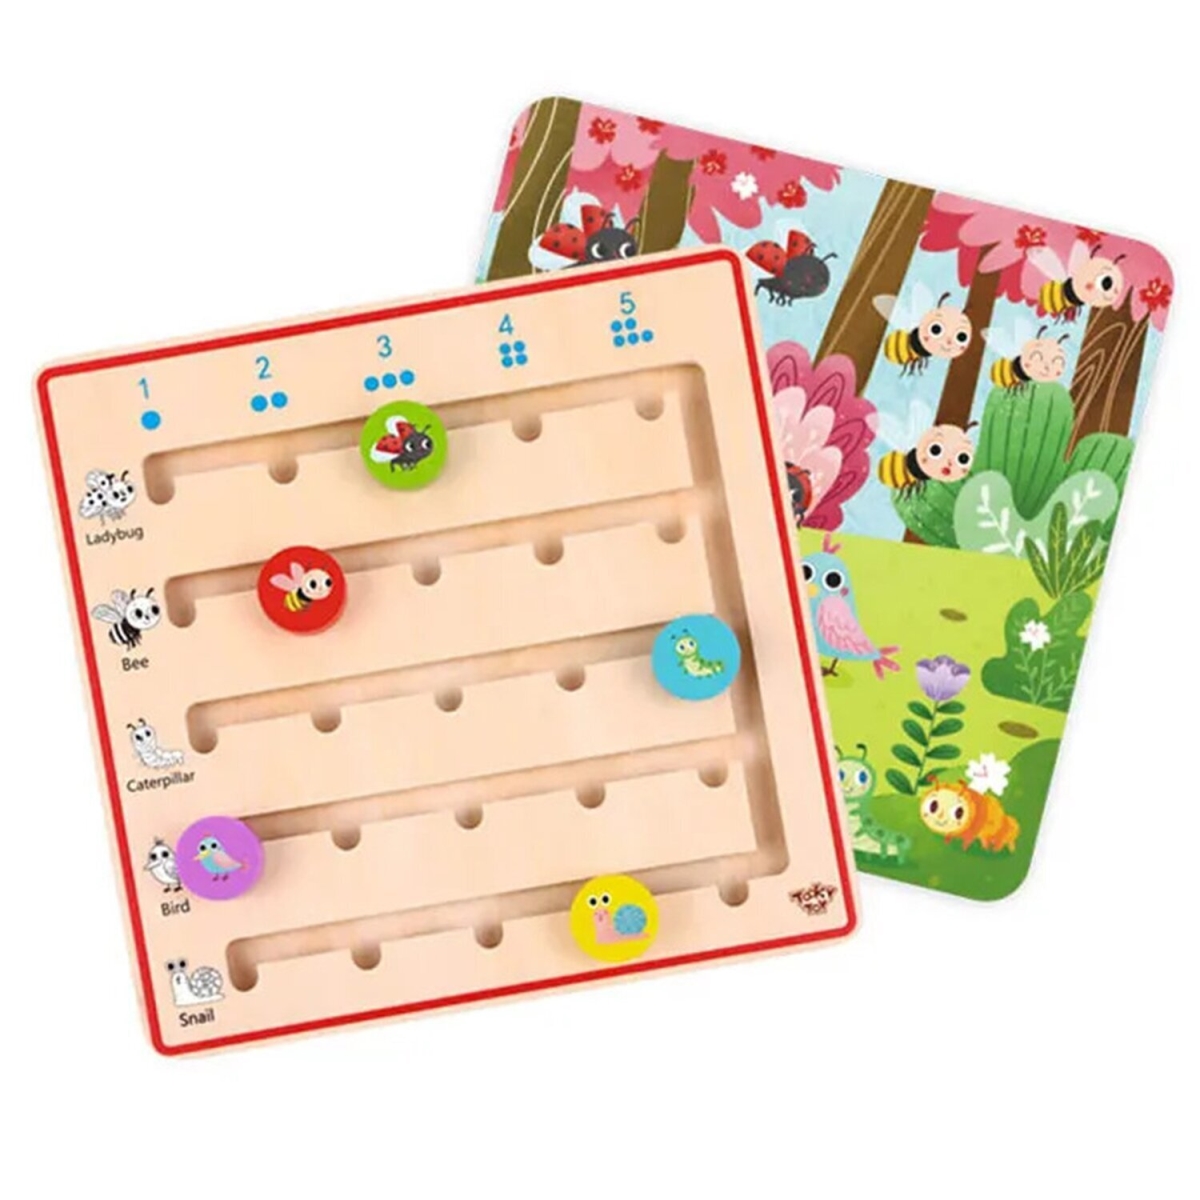 Picture of Tooky Toy 300229 22 x 22 x 5 cm Counting Game